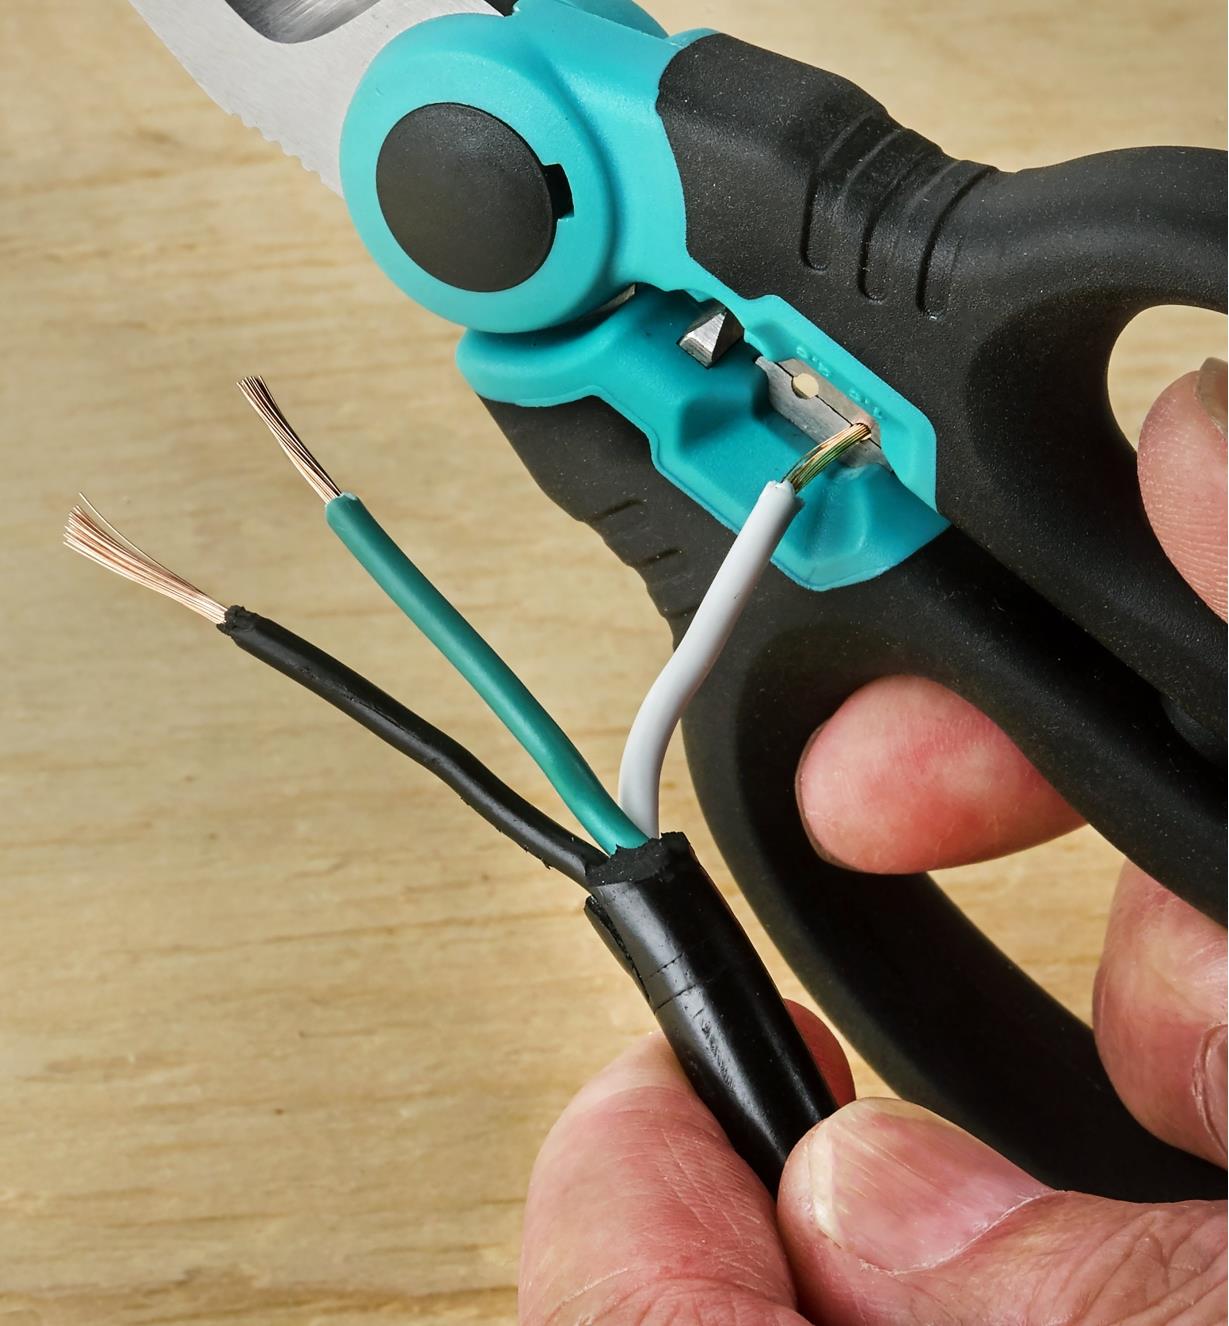 Using the wire-stripping notch of the electrician scissors to remove wire sheathing